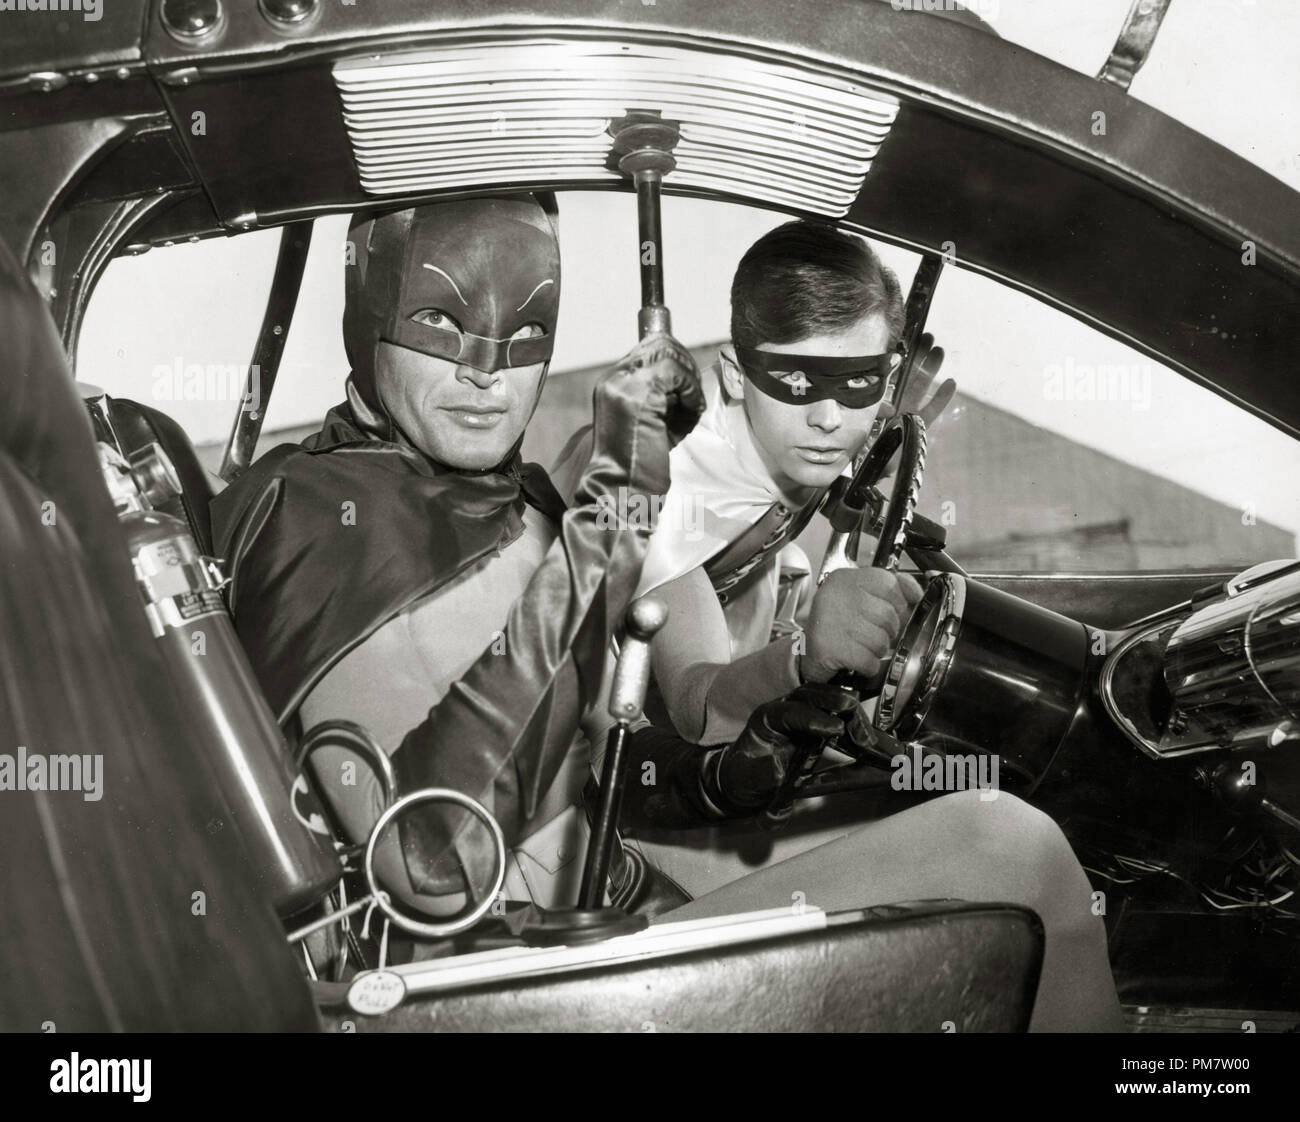 Adam west batman costume hi-res stock photography and images - Alamy